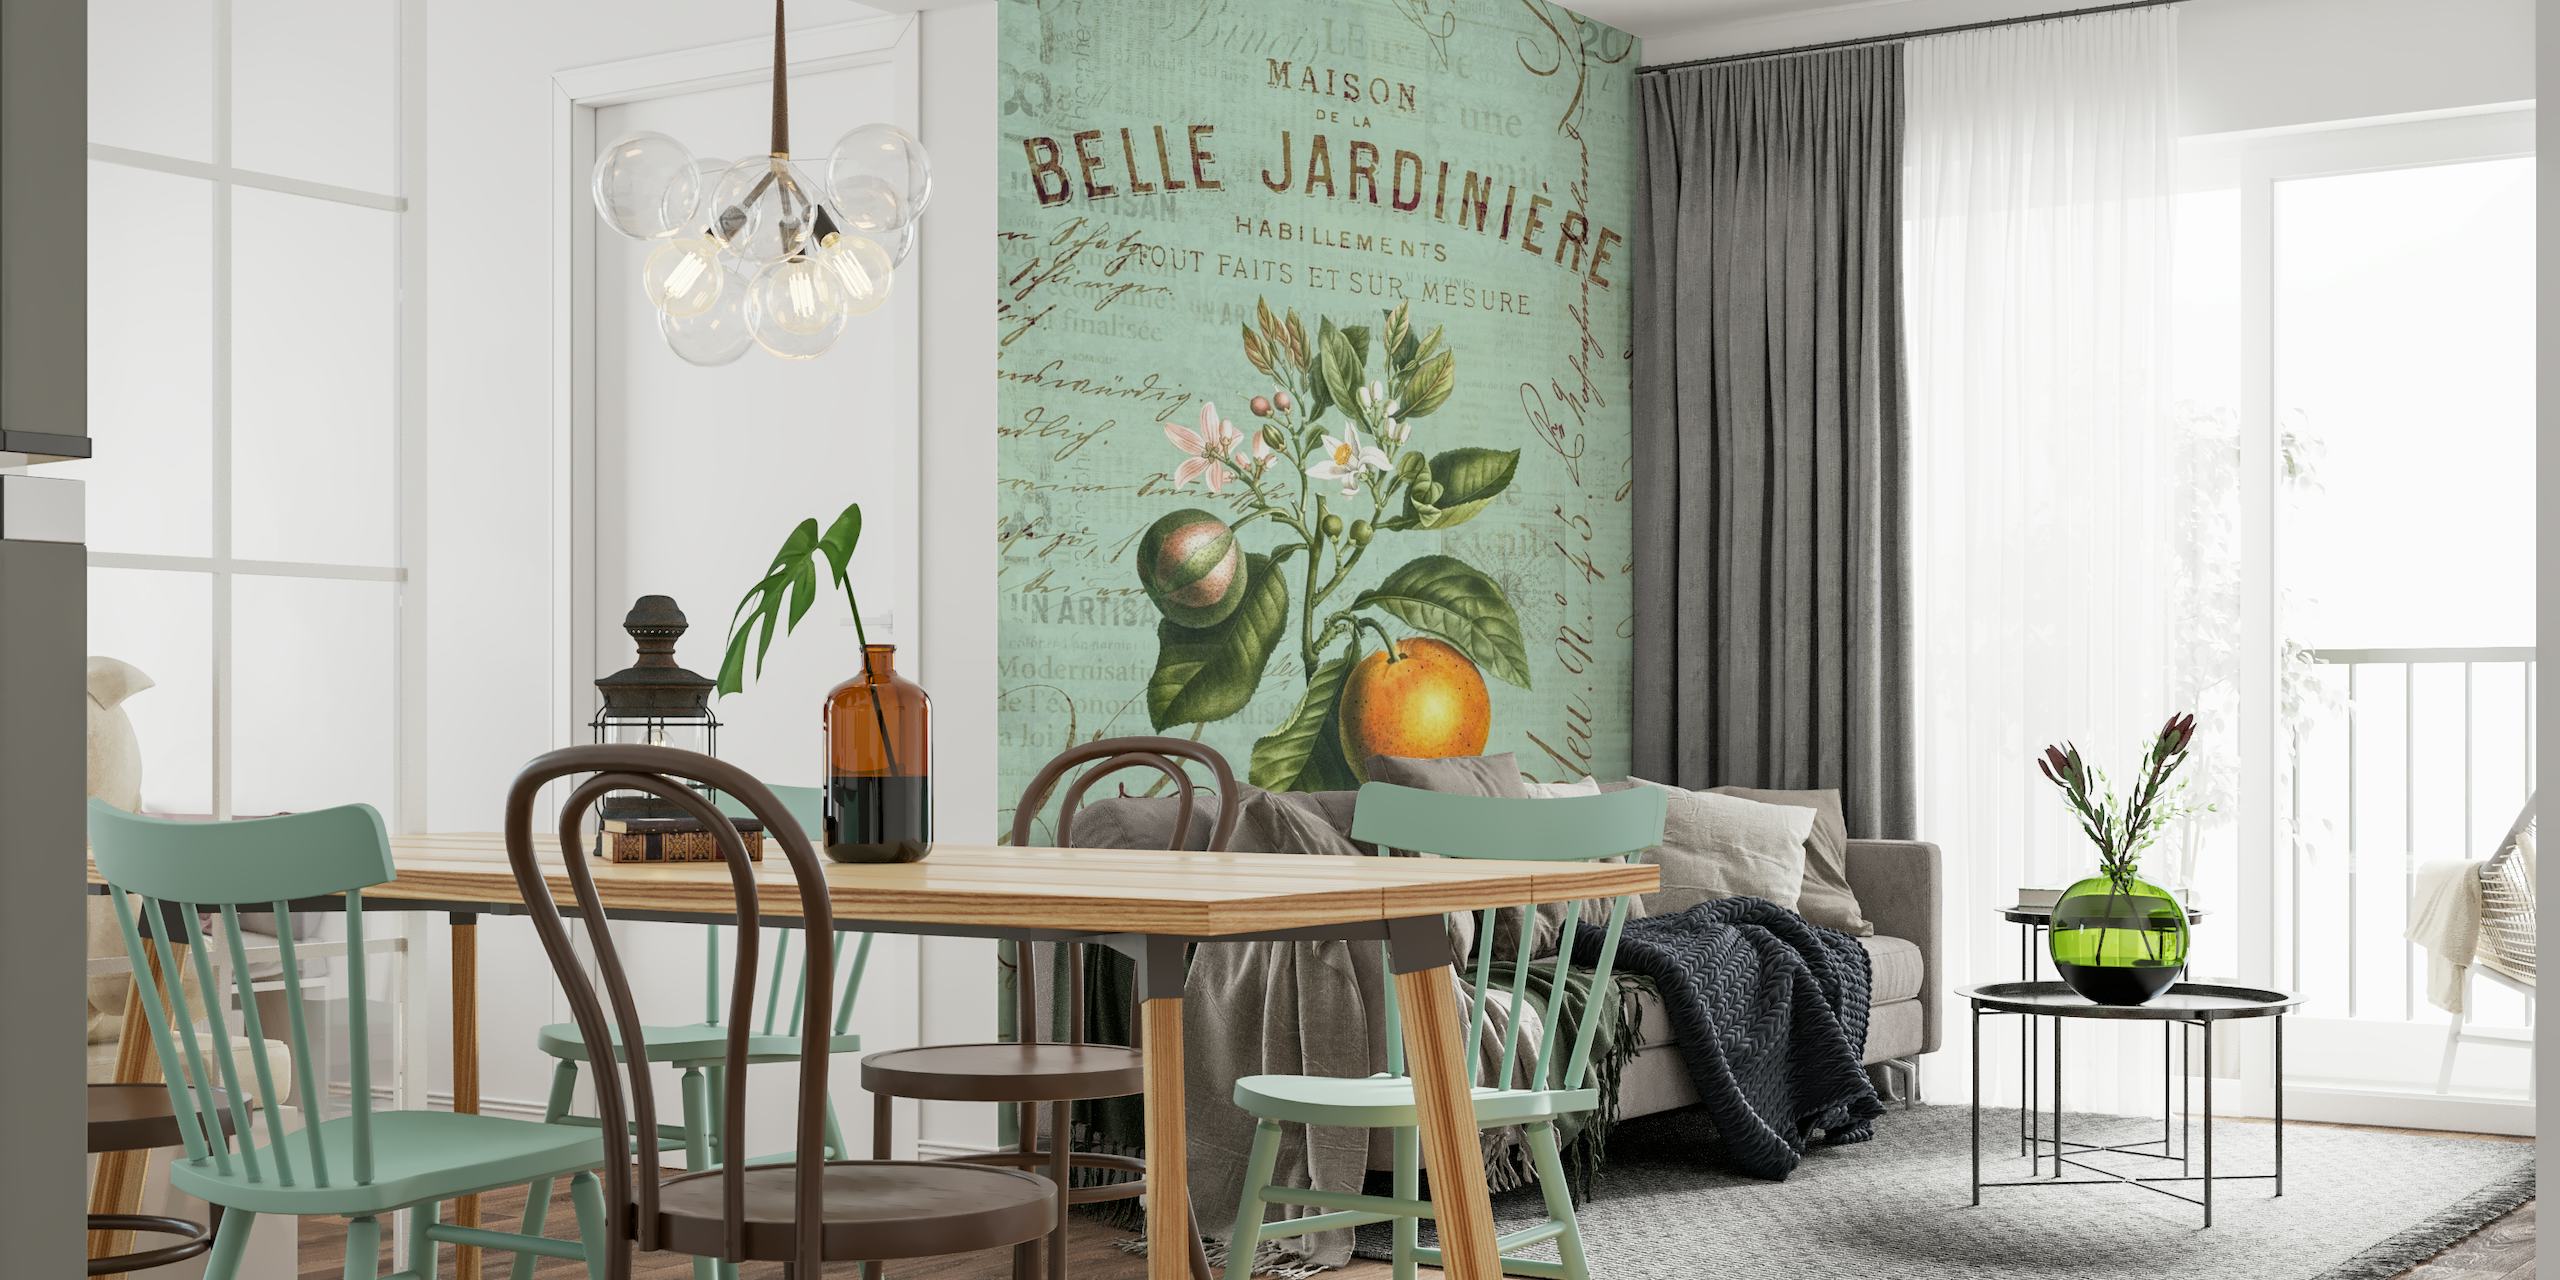 Vintage-inspired wall mural with orange fruit and French texts in a rustic design